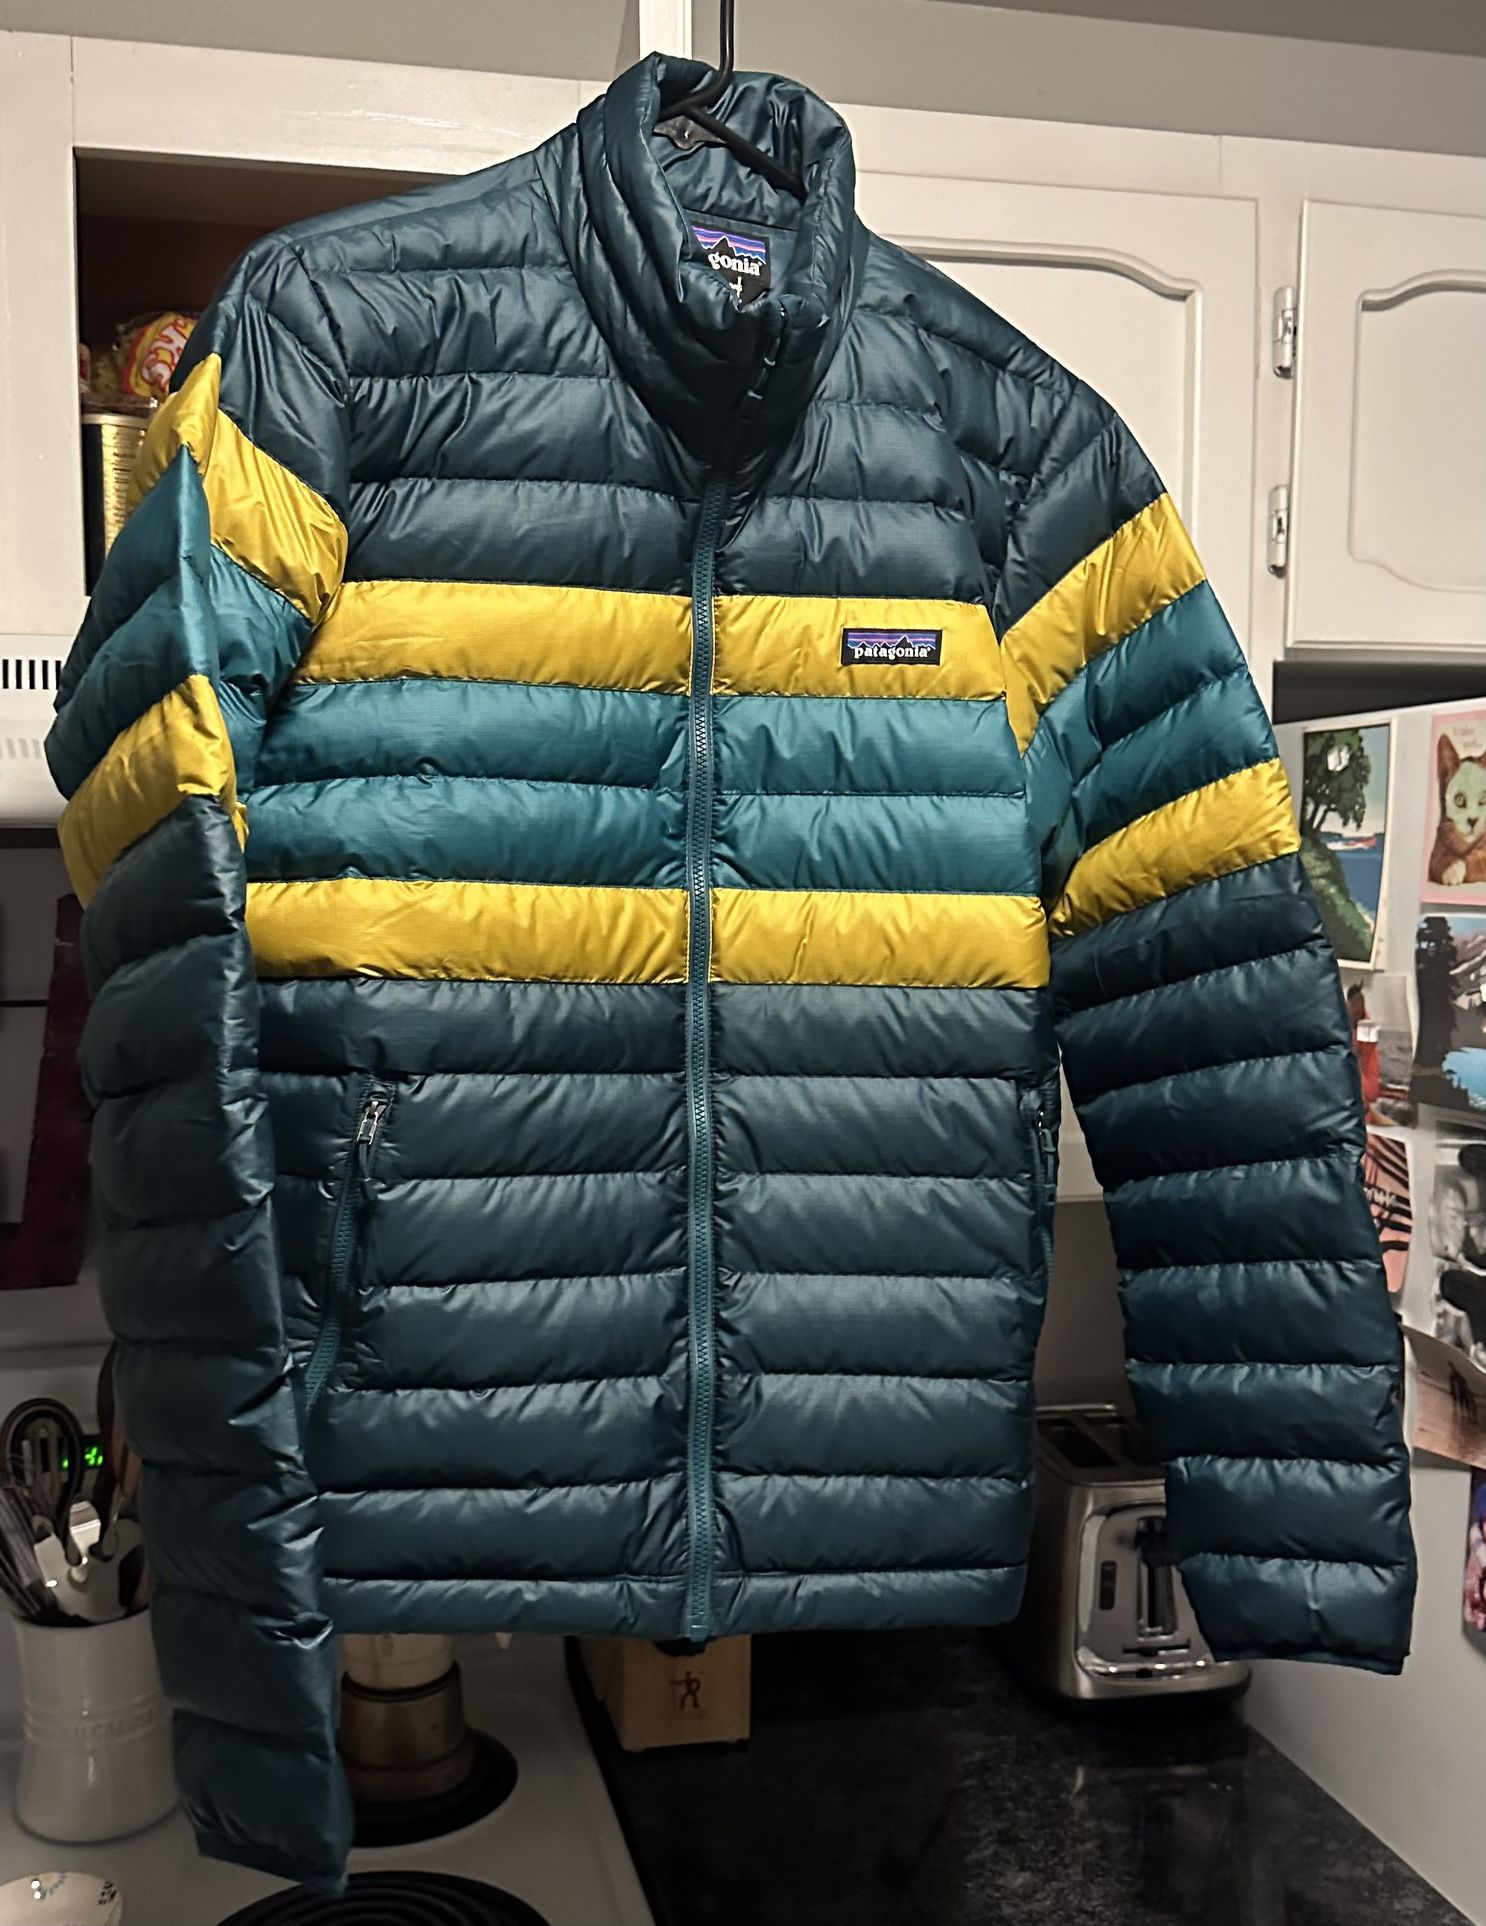 Men’s M Patagonia Jacket - Tags Attached 